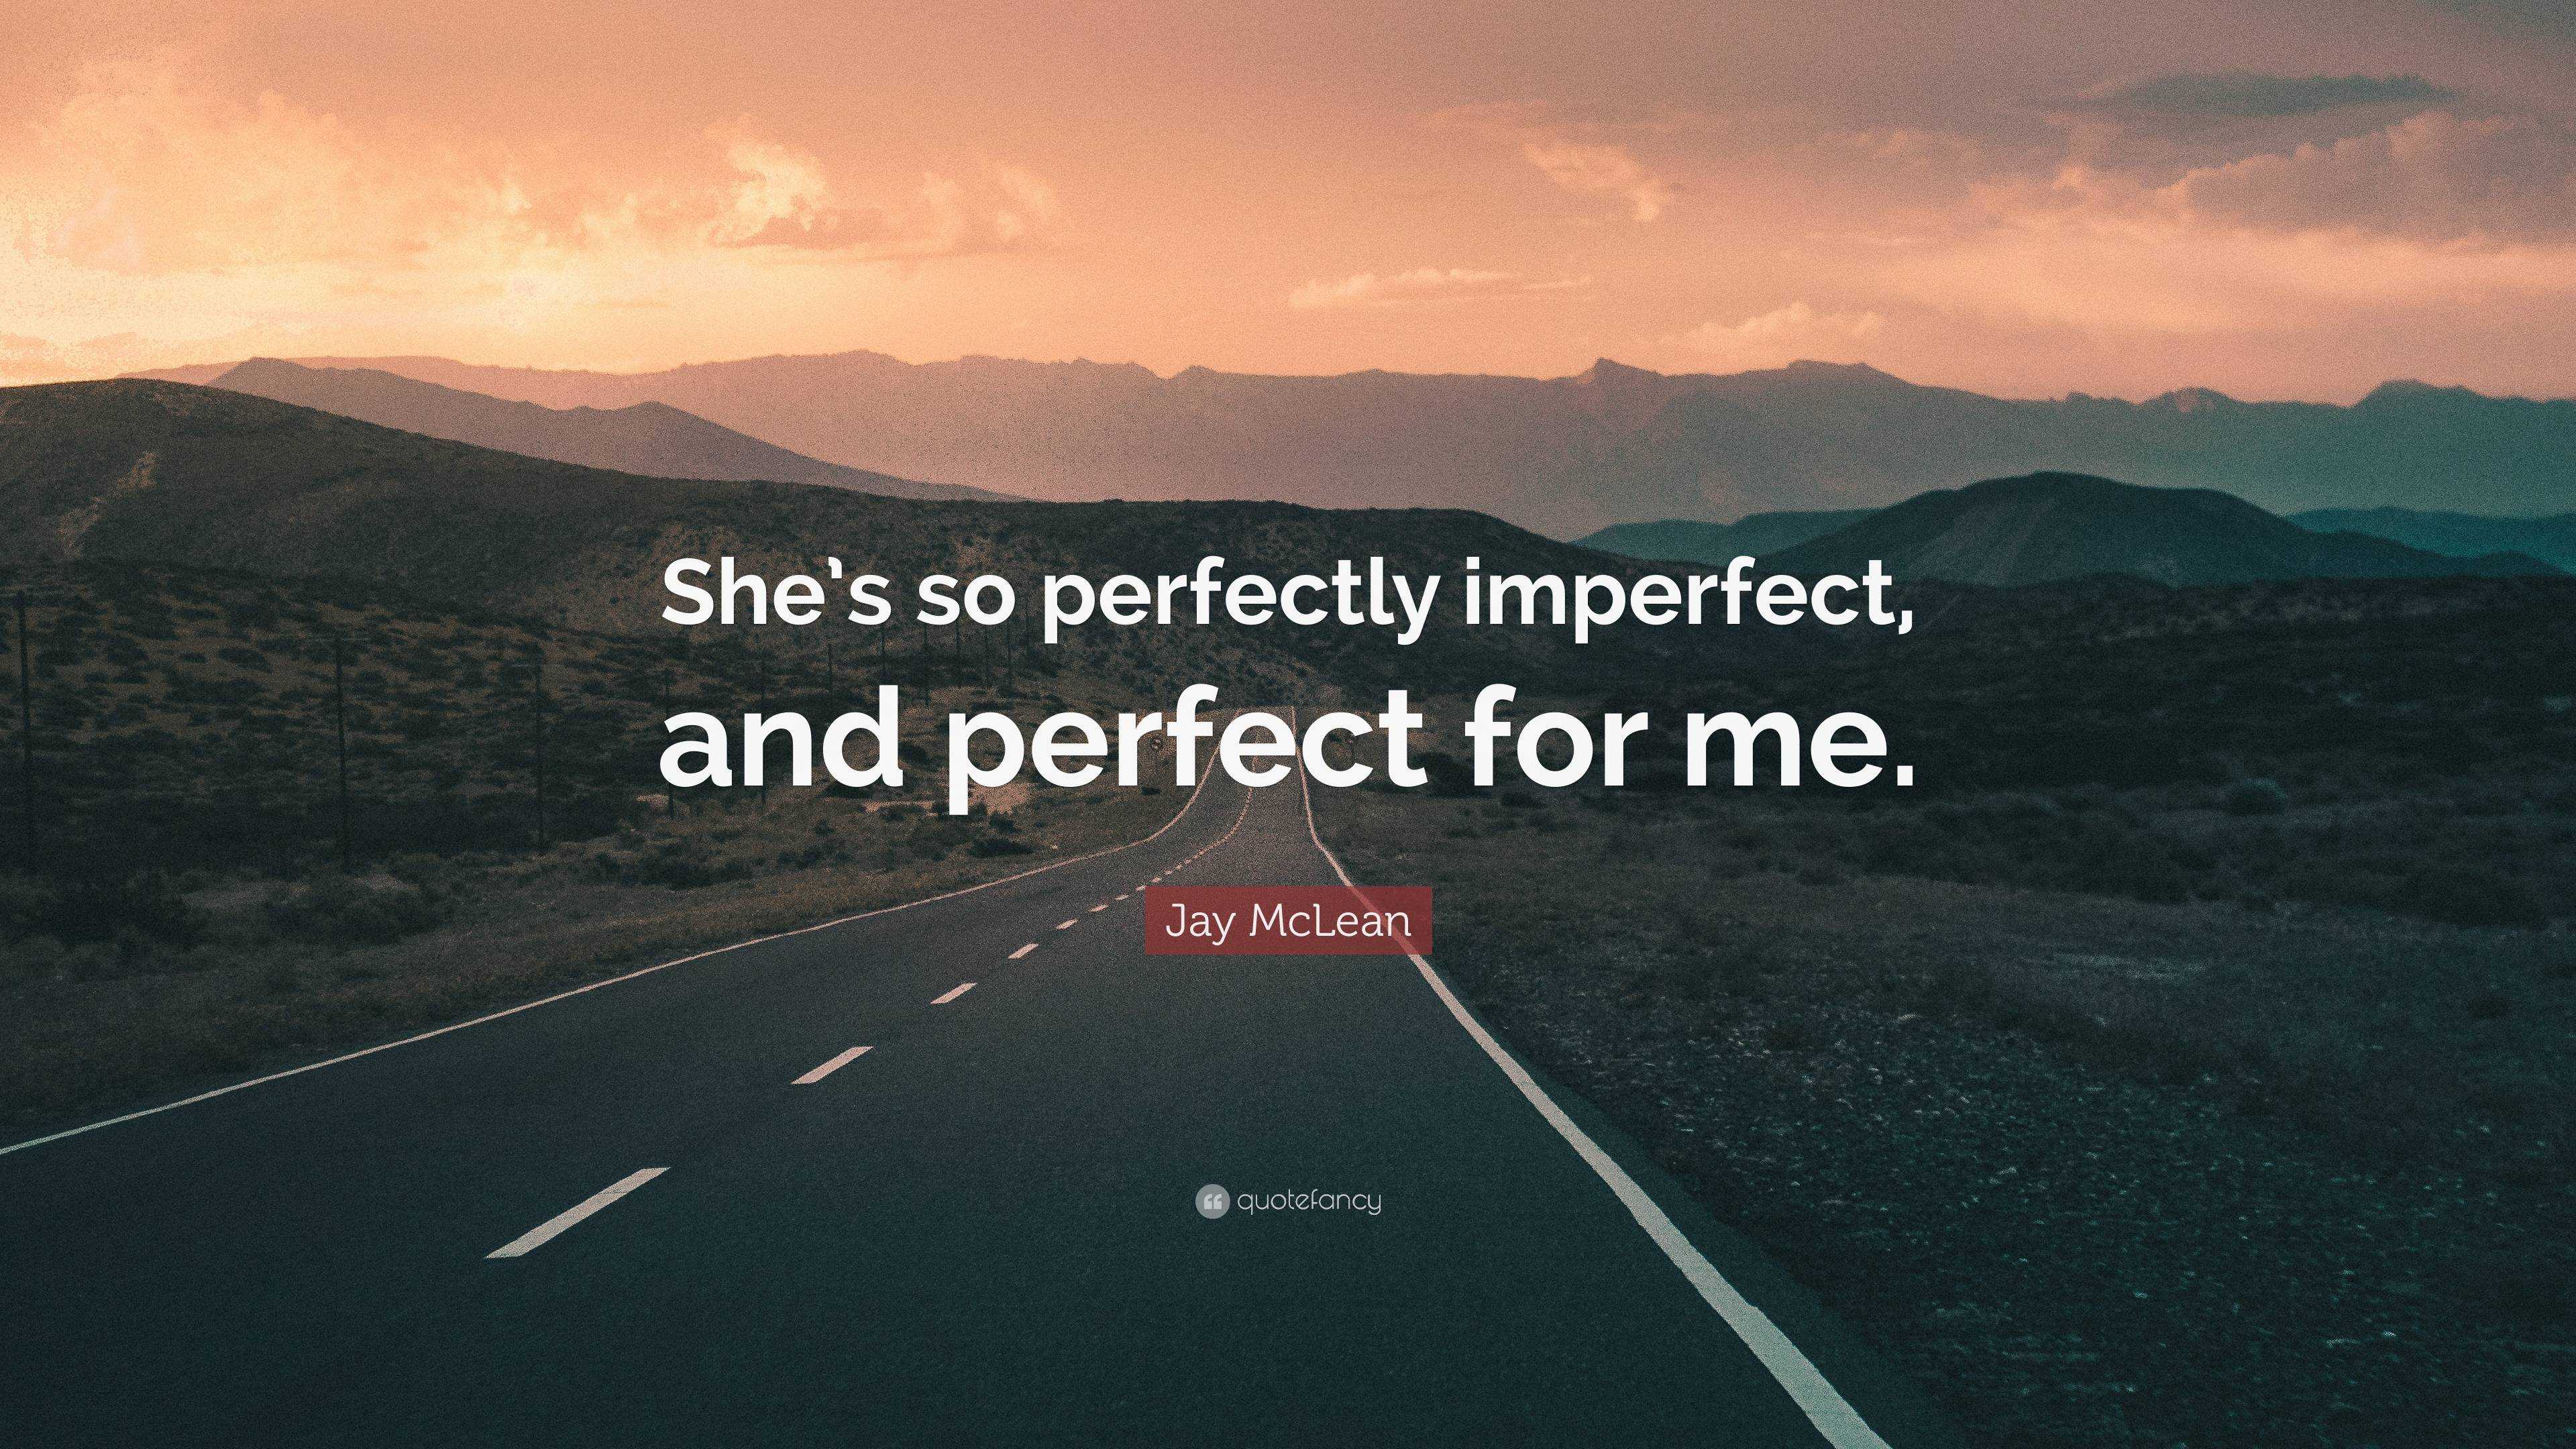 Jay McLean Quote: “She's so perfectly imperfect, and perfect for me.”